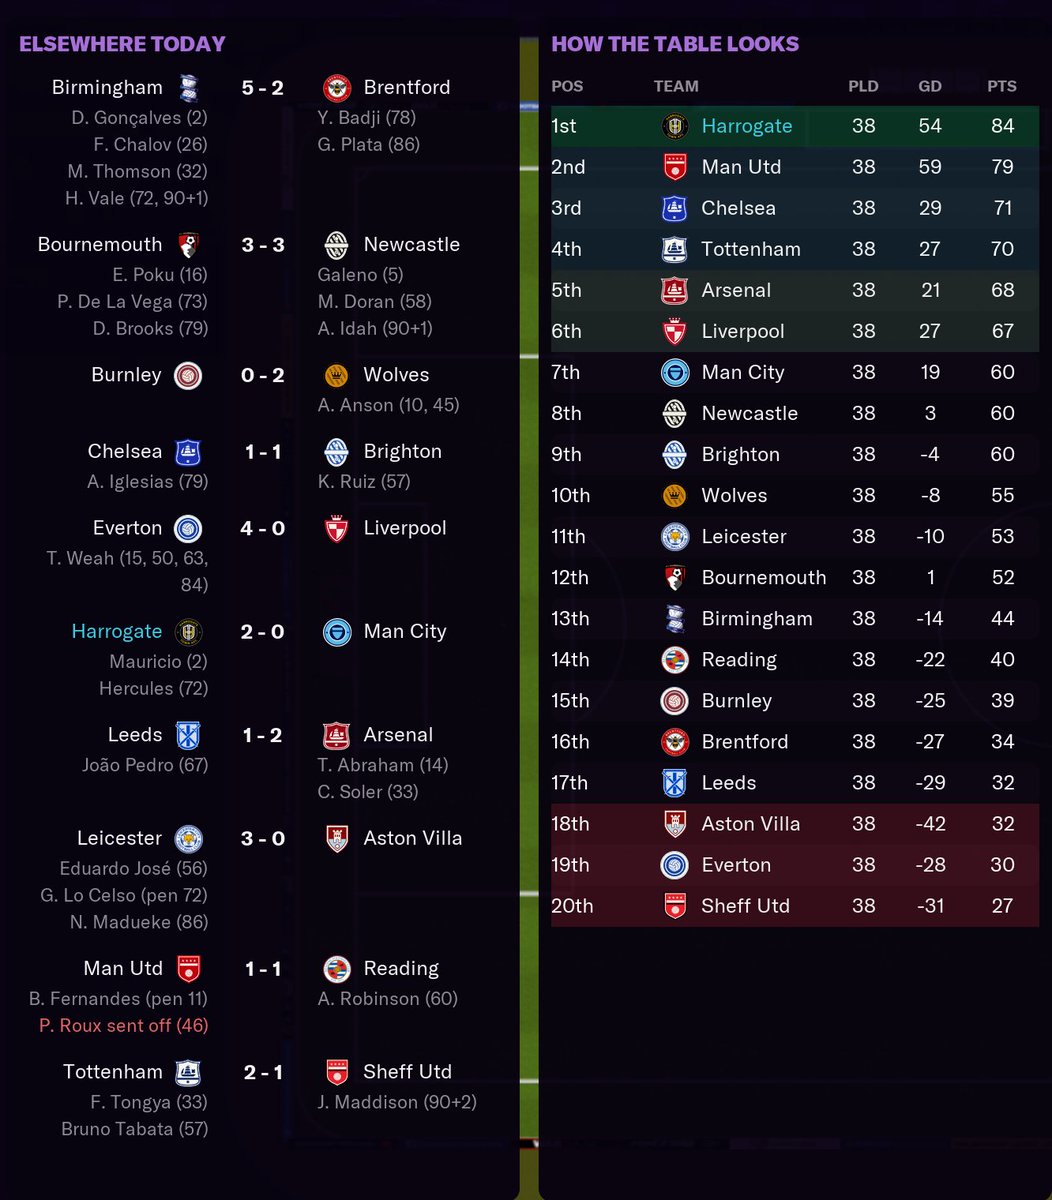 The final table. We win the league for the second time. But more importantly, LEEDS STAY UP. MAKE YORKSHIRE GREAT AGAIN